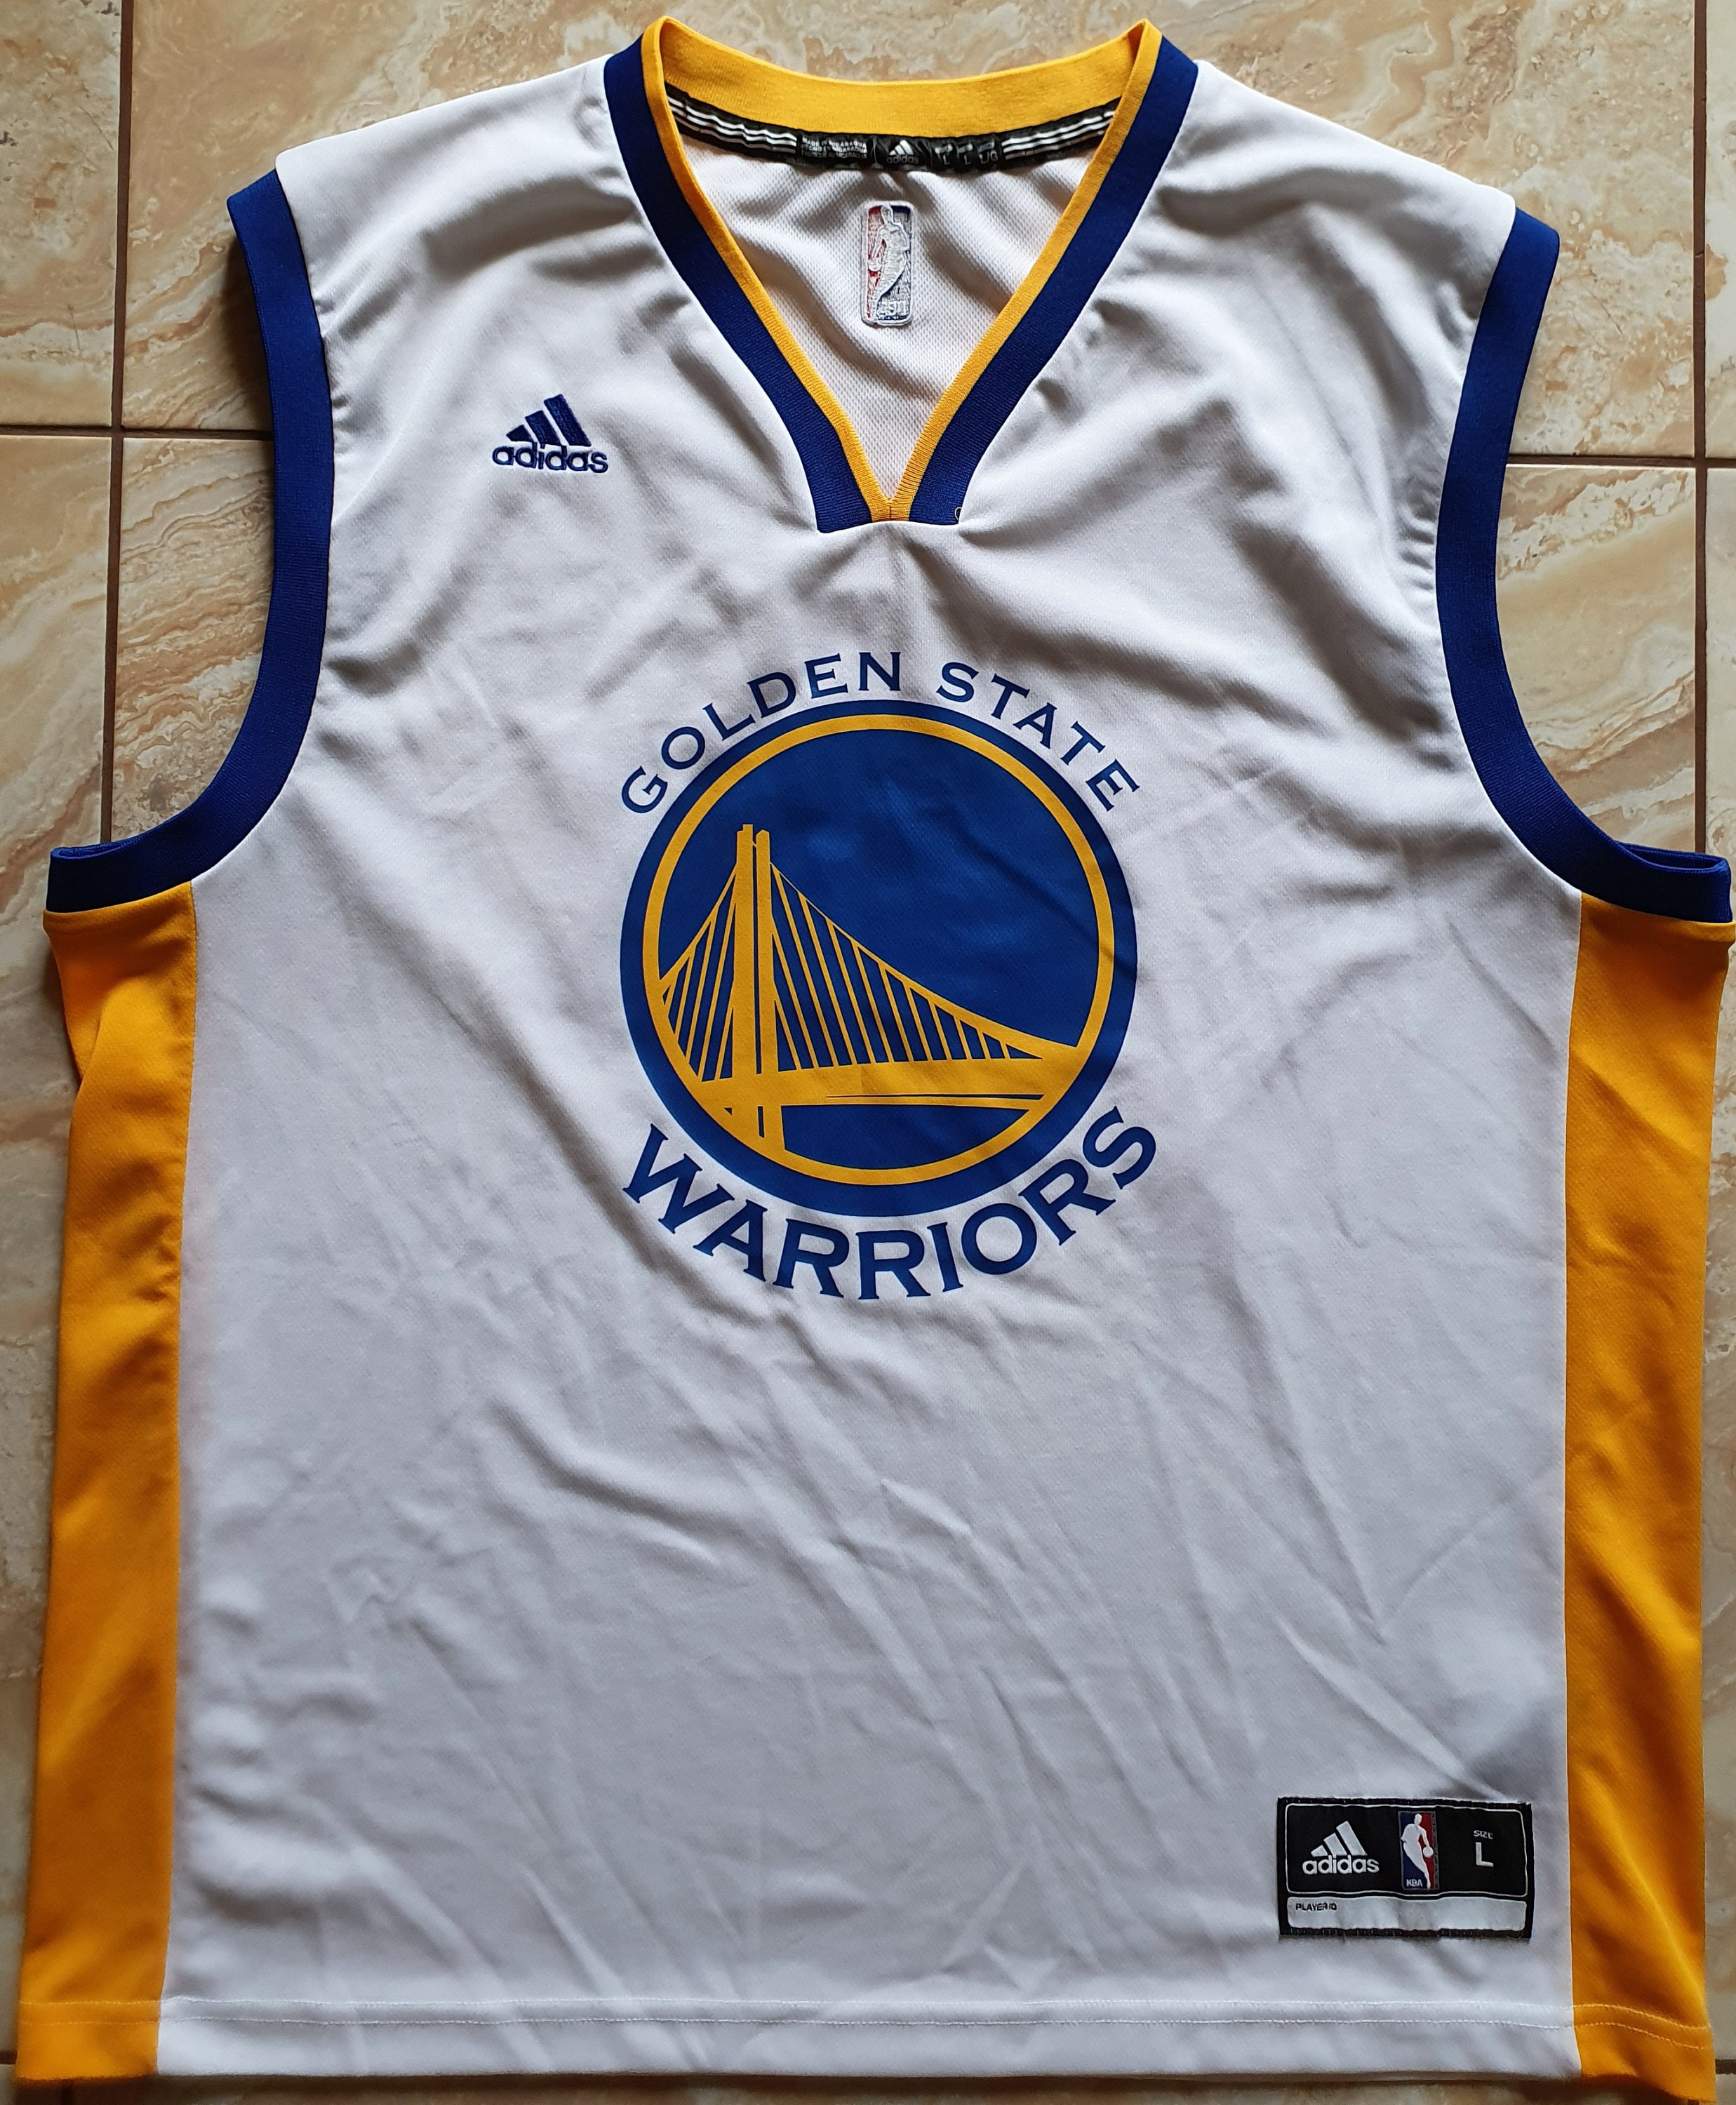 Golden State Warriors #30 Curry Adidas Black Limited Eddition Size L NBA  Shirt